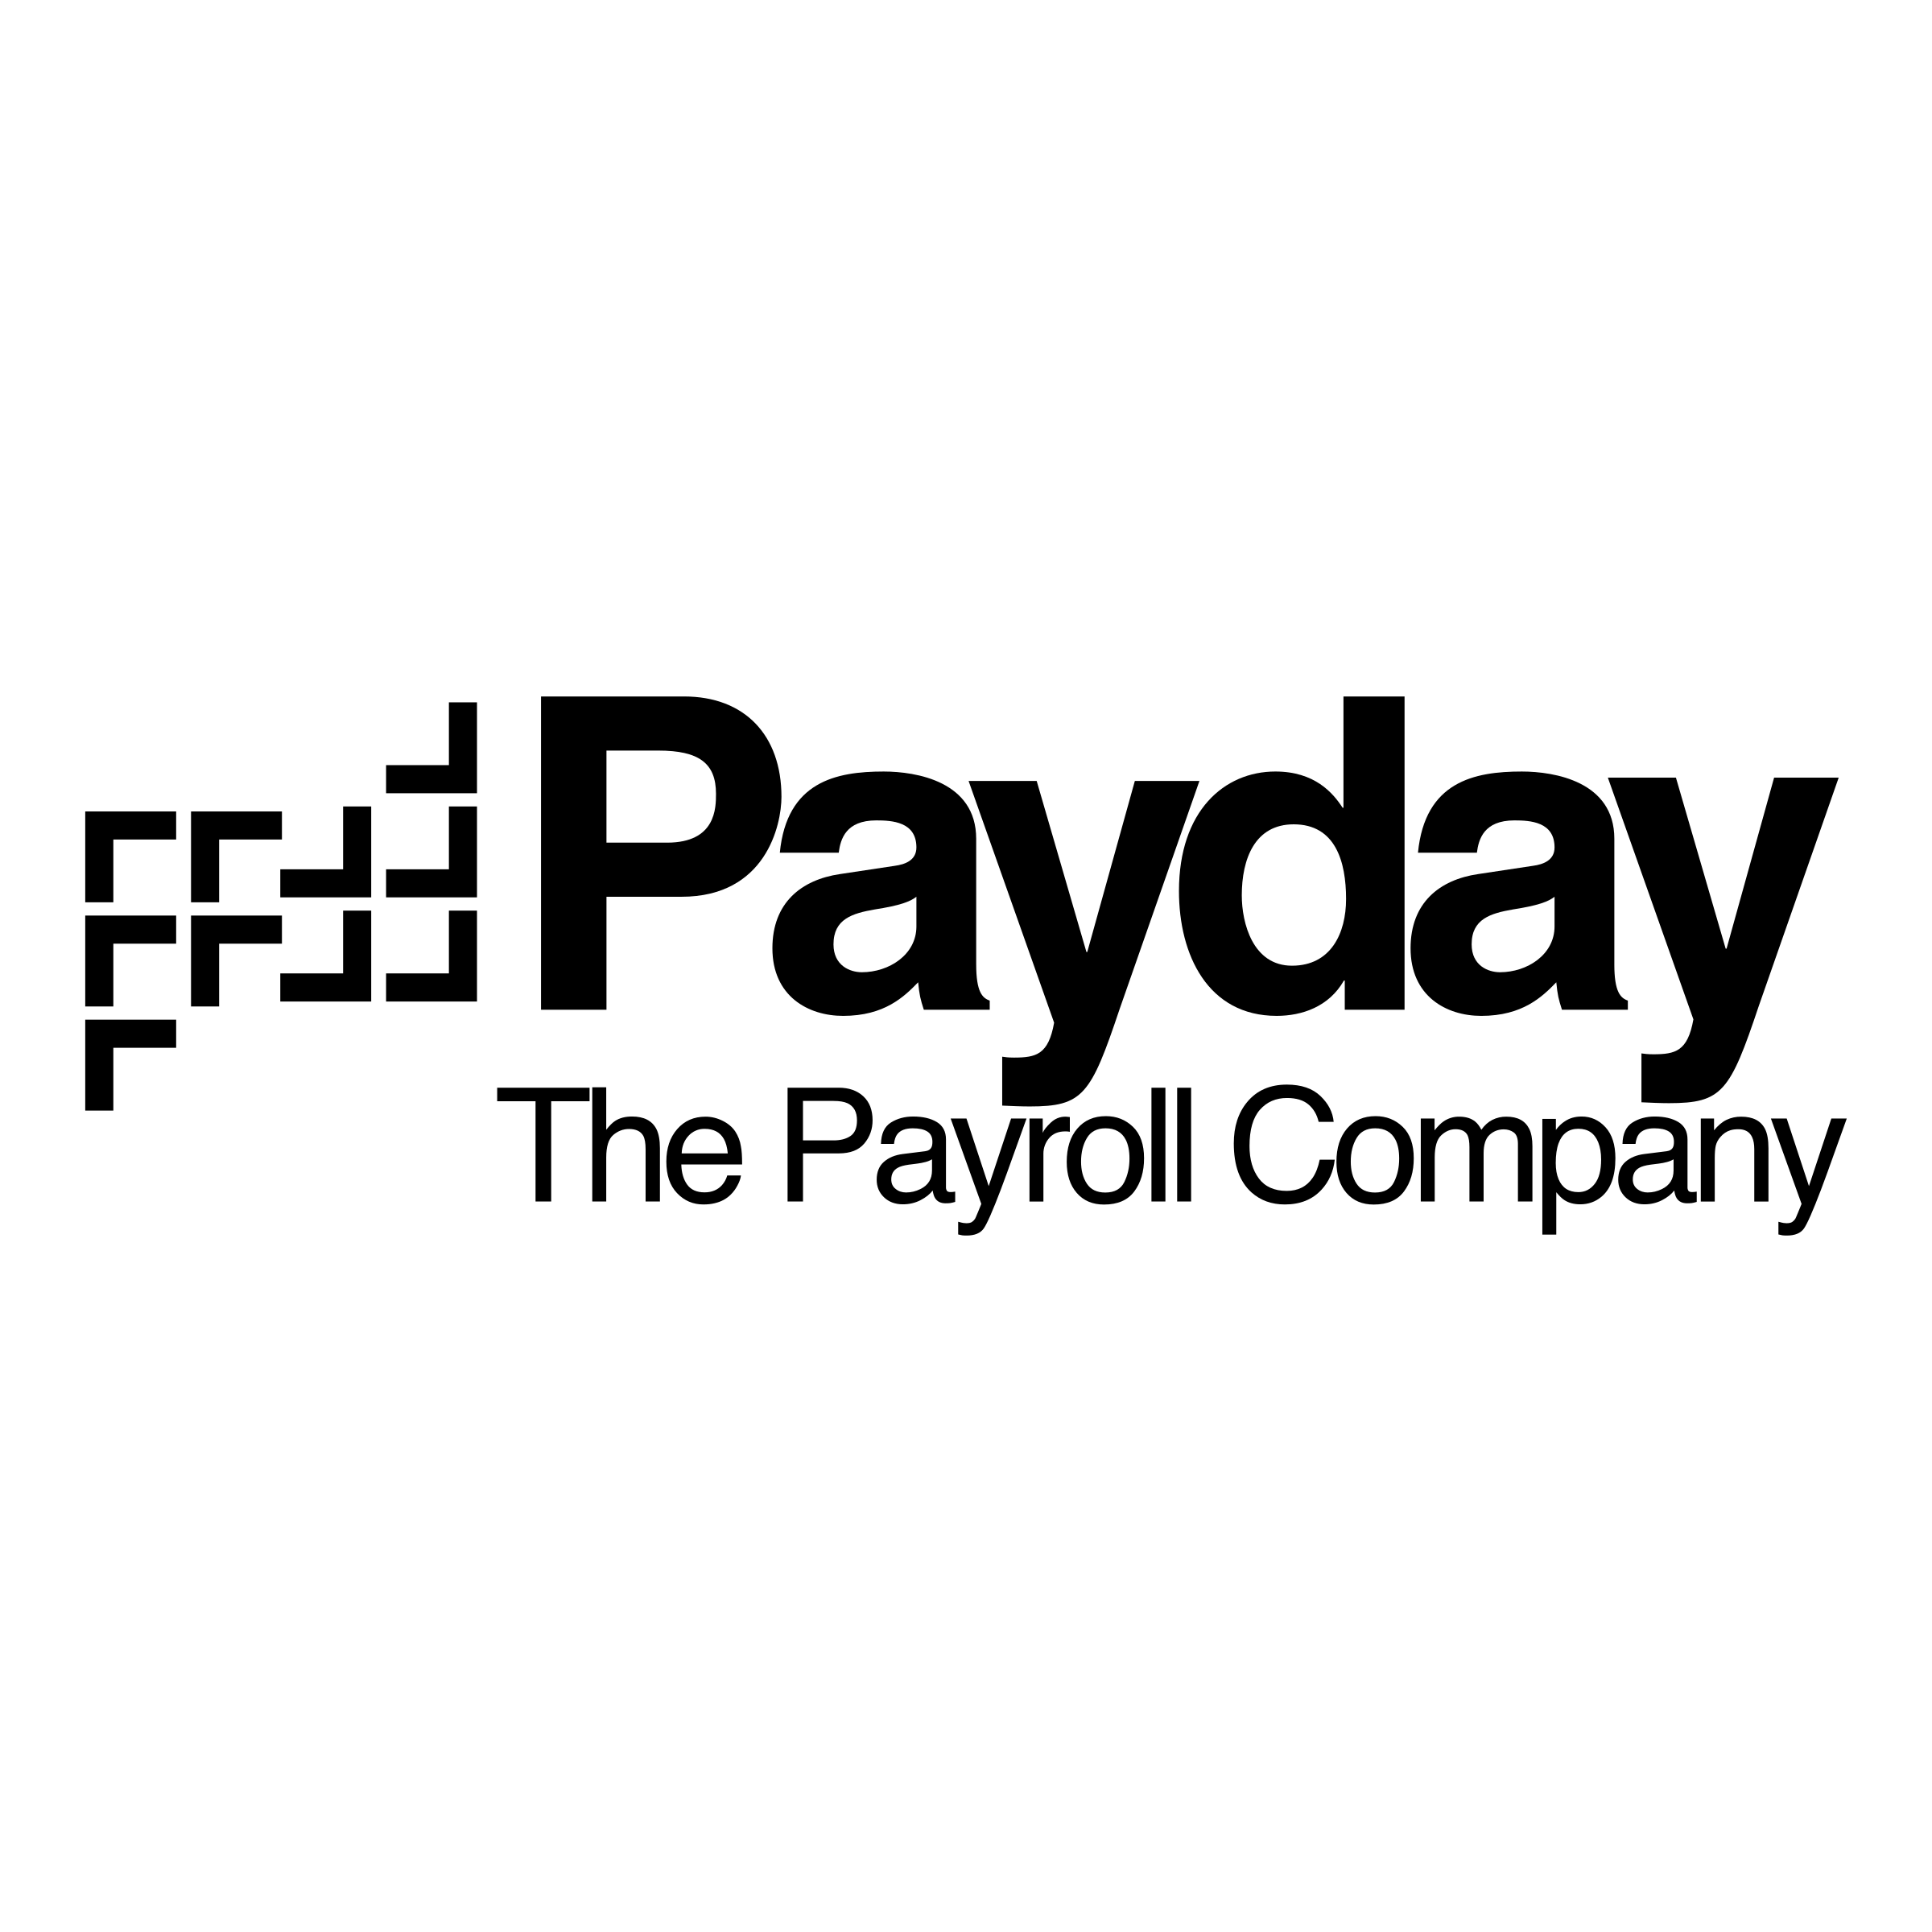 Payday Logo - Payday Logo PNG Transparent & SVG Vector - Freebie Supply